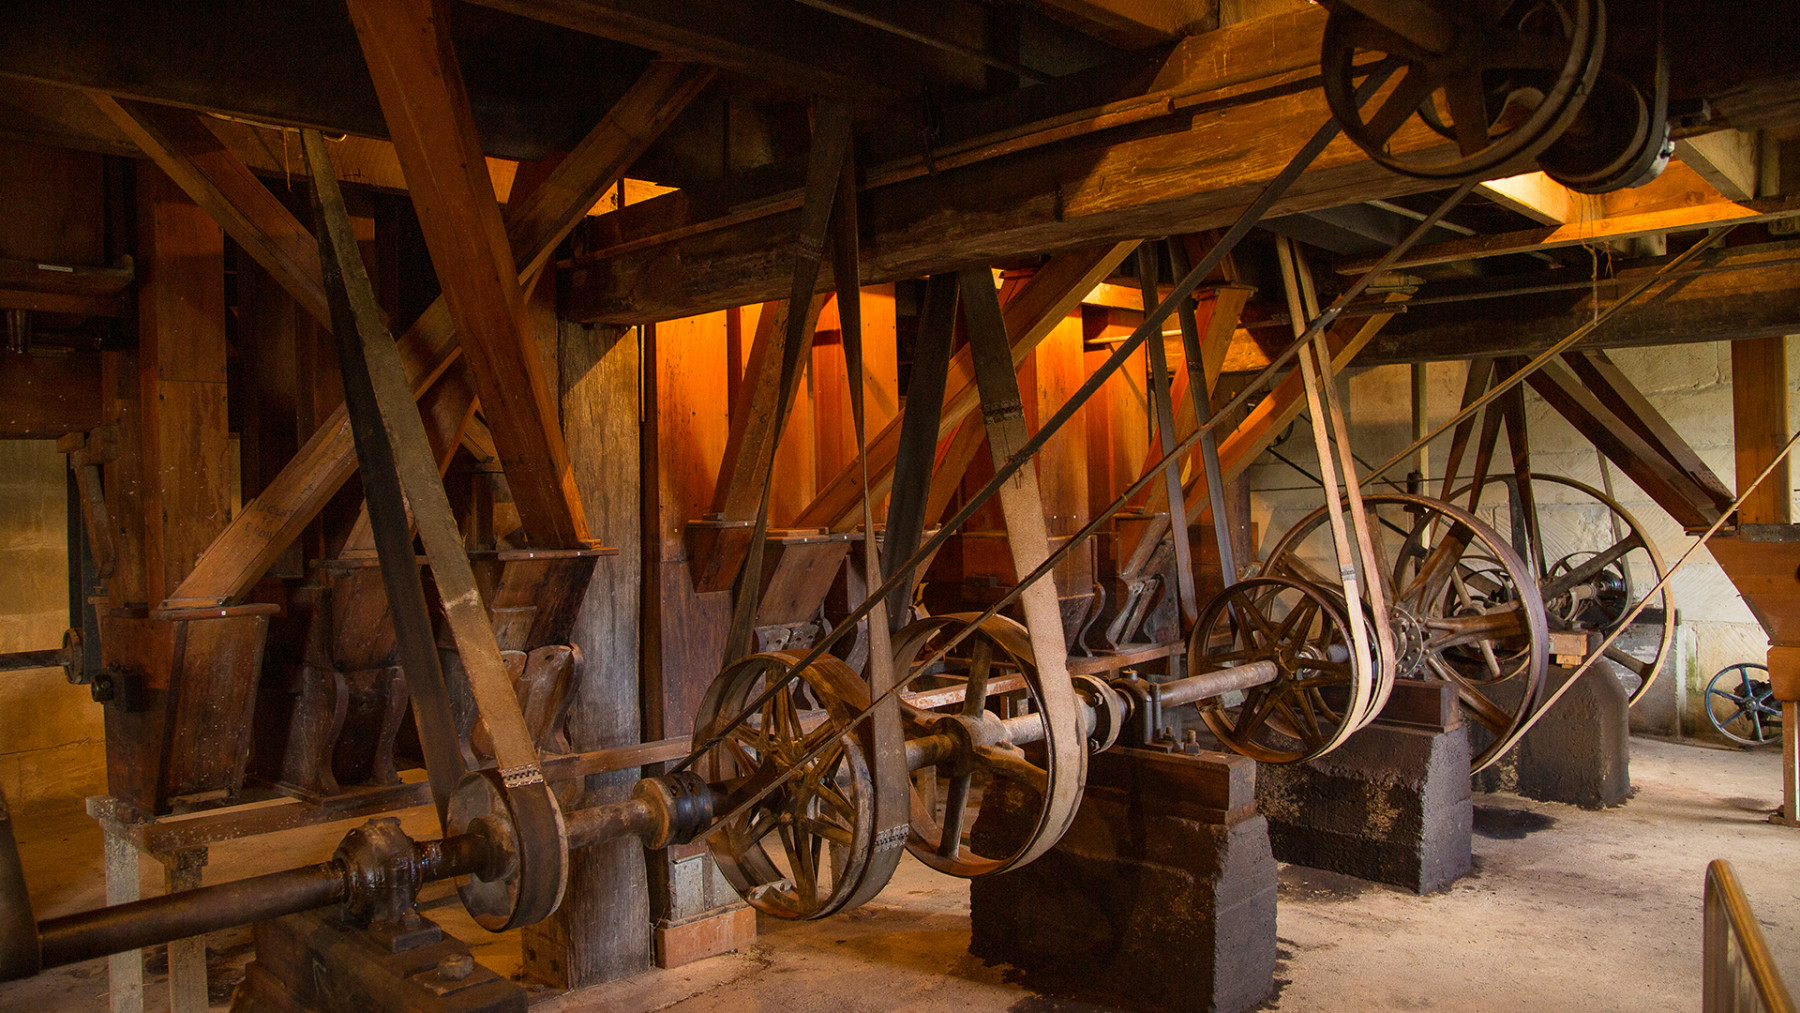 Wheels, pullies and belts in the machinery at Clarks Mill